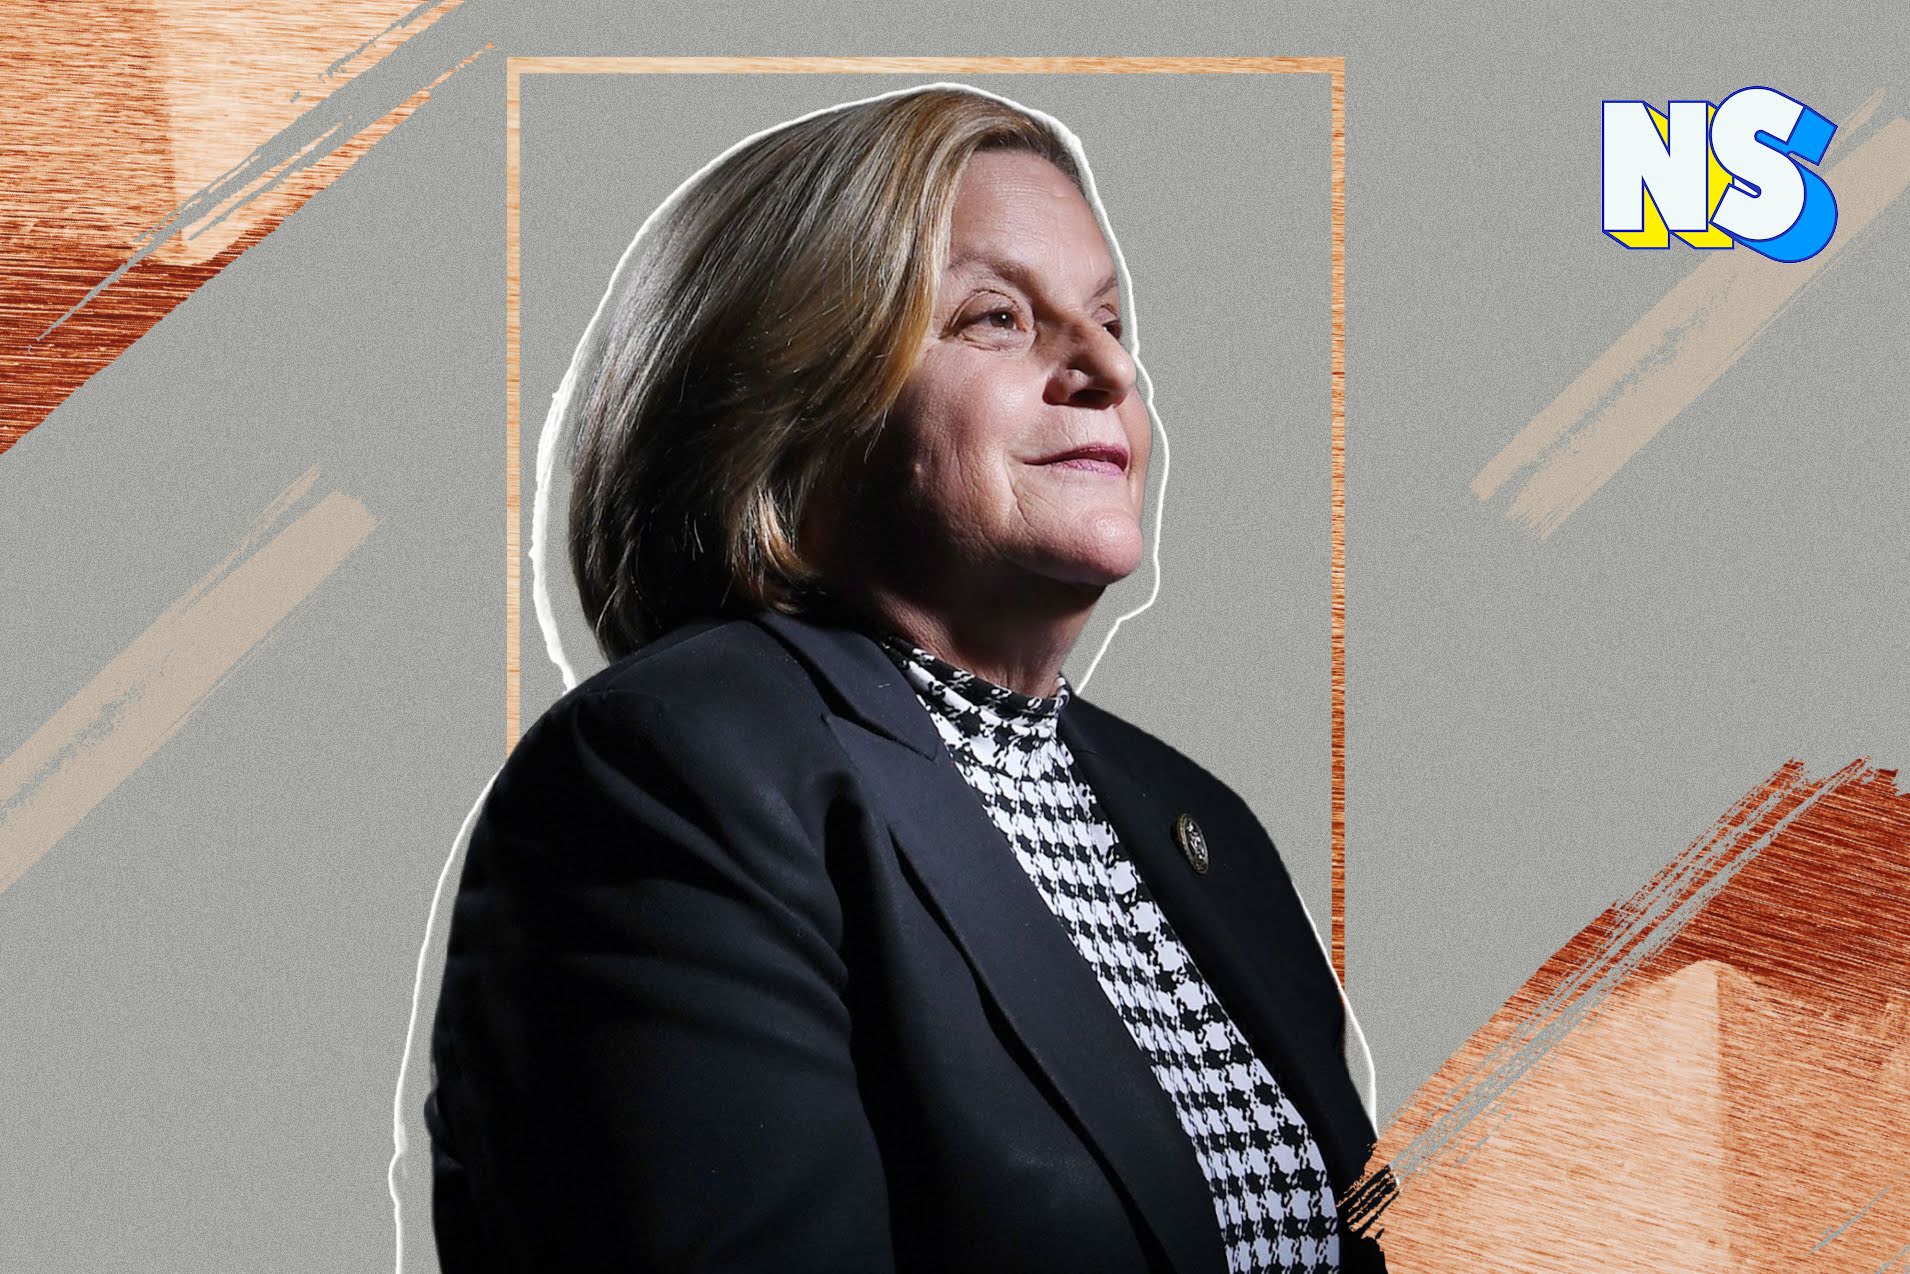 After a Long Career in Politics, This Moment Solidified Ileana Ros-Lehtinen’s Journey